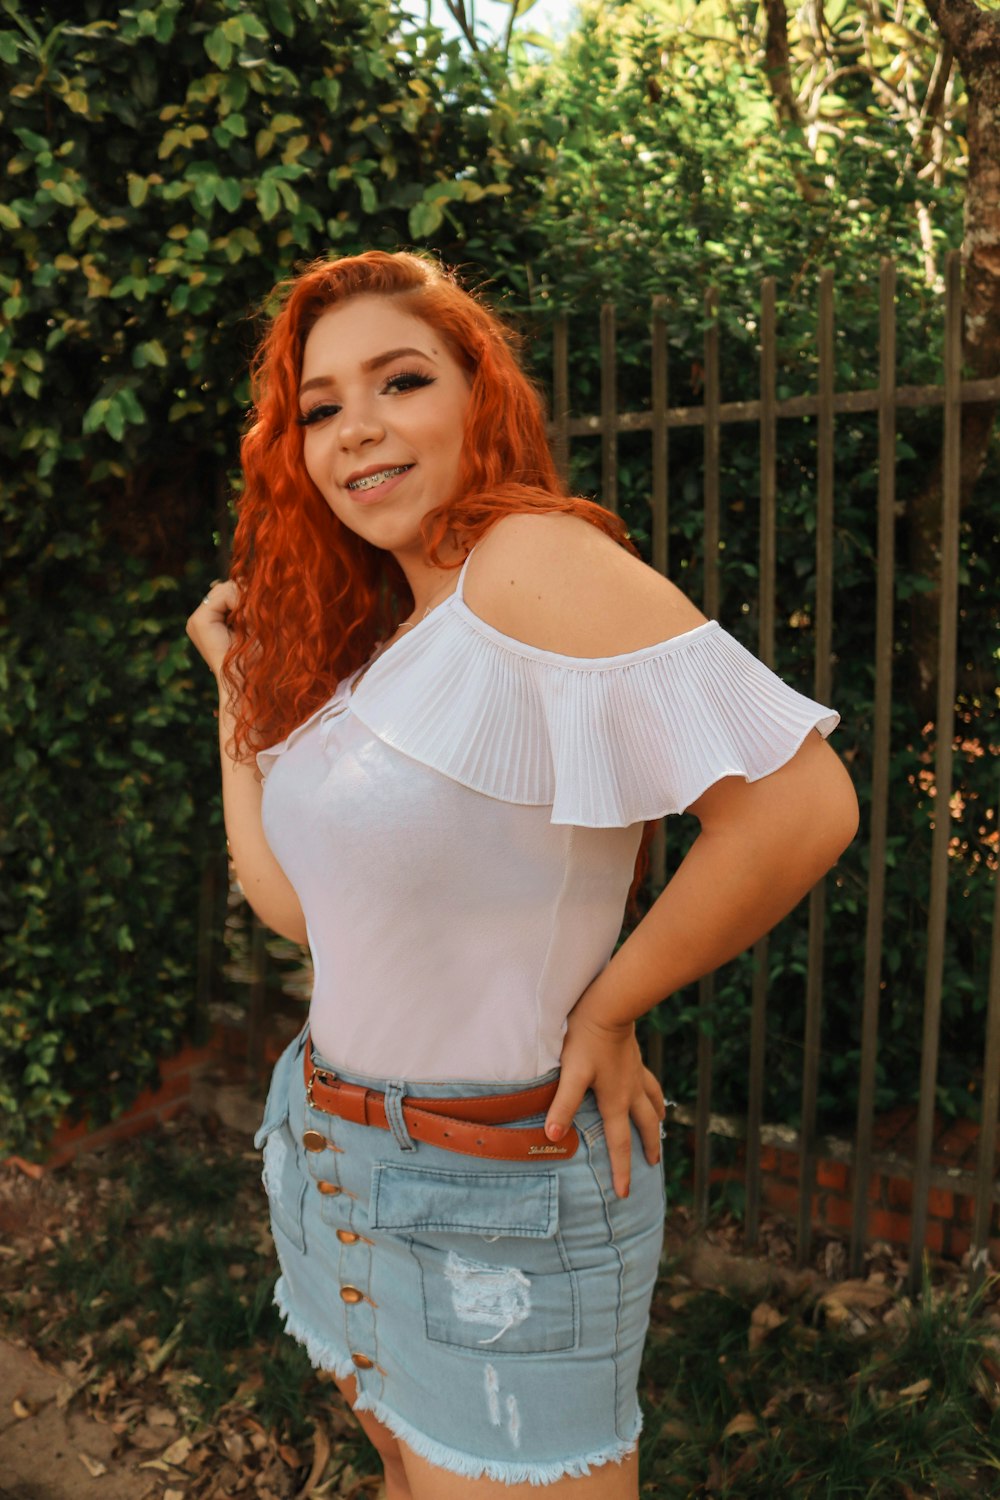 a woman with red hair wearing a white top and denim skirt